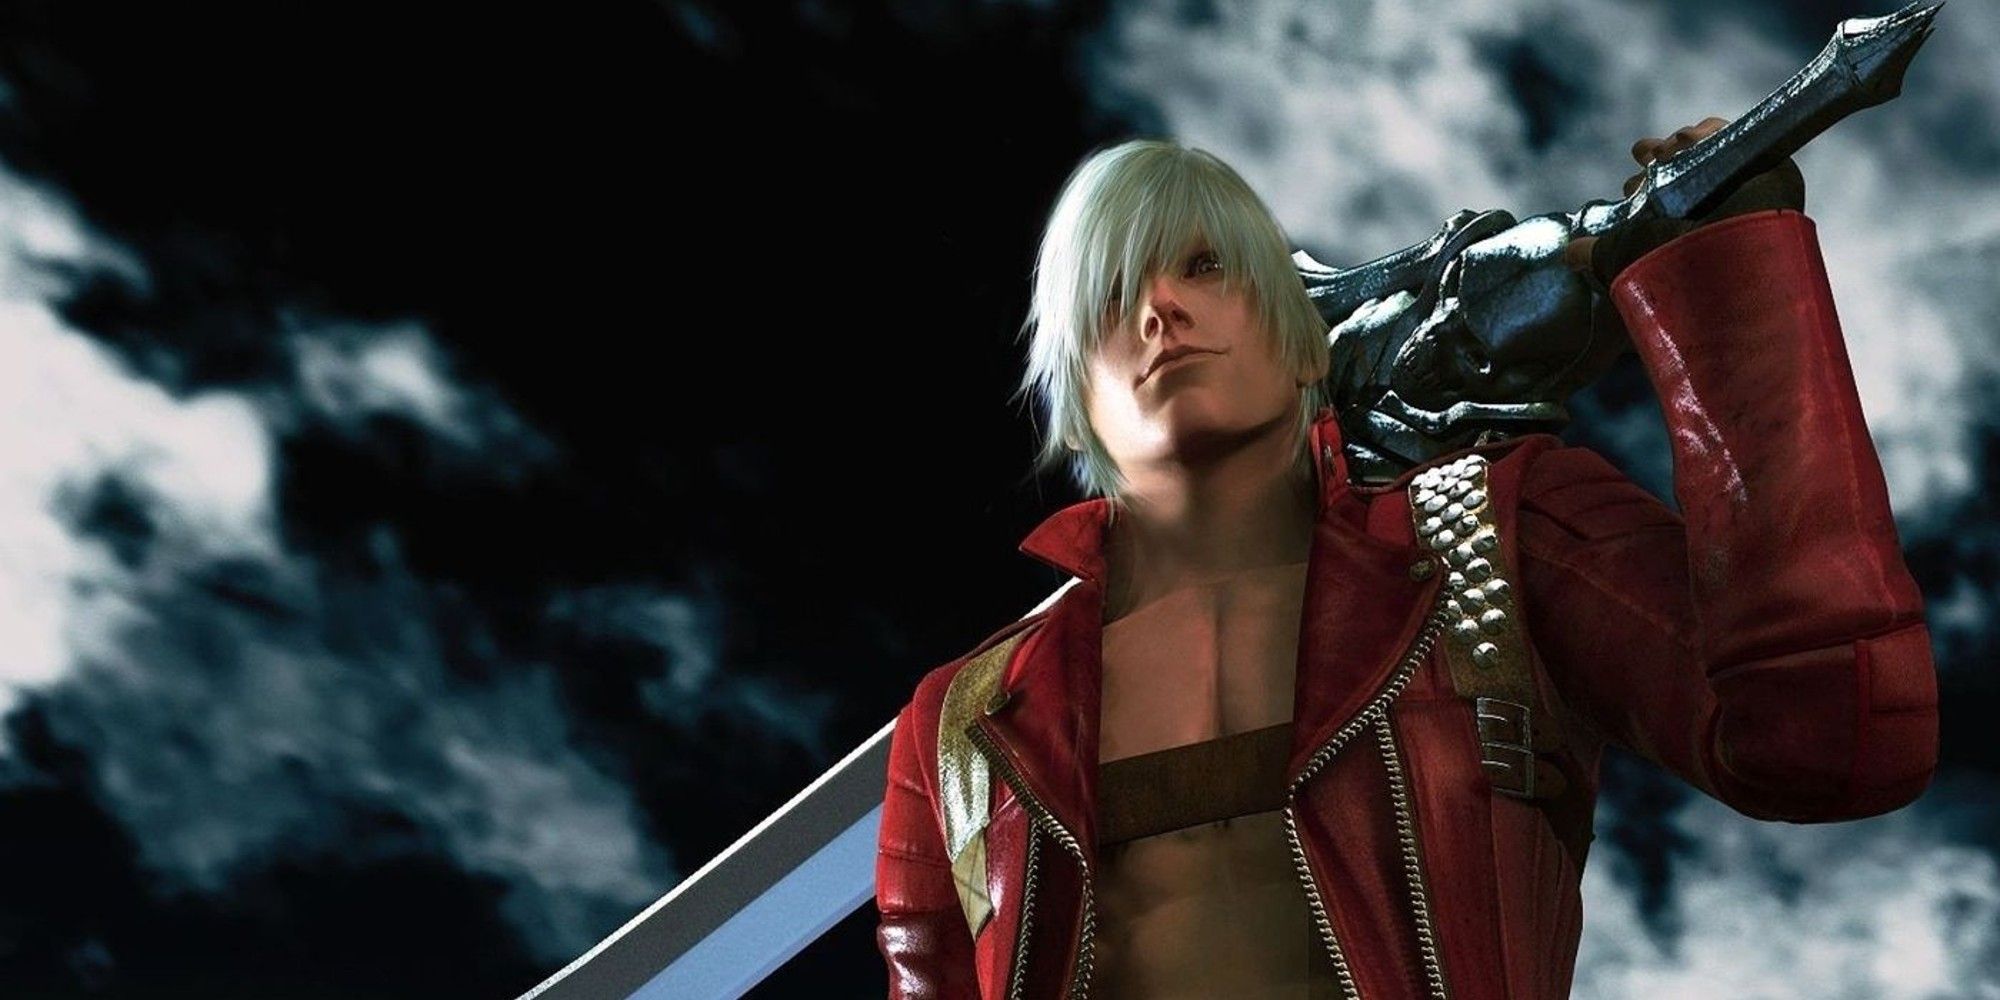 Devil May Cry - Dante Shows Off His Sword